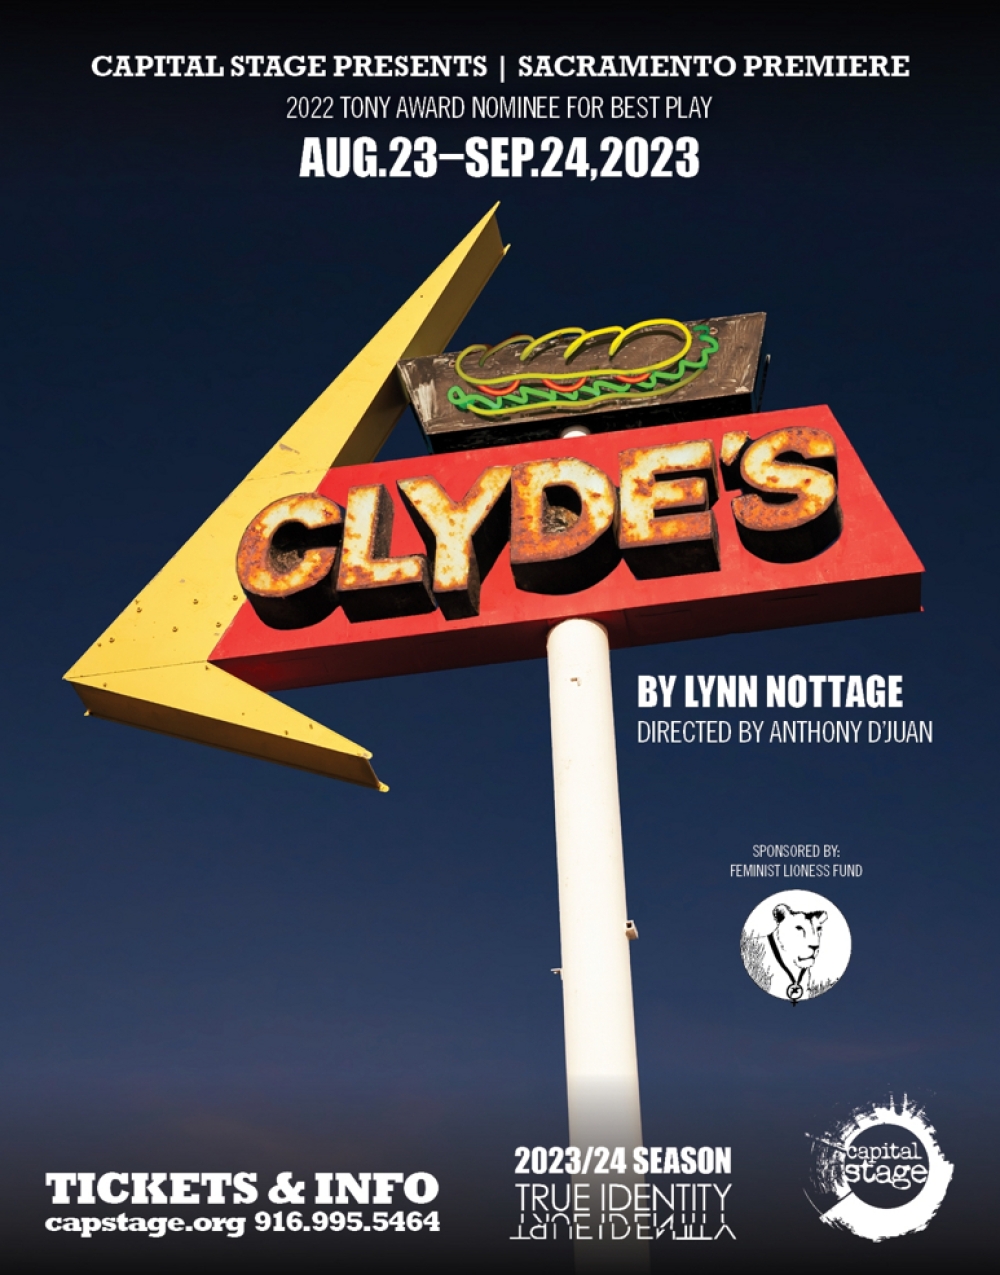 Clyde's at Capital Stage